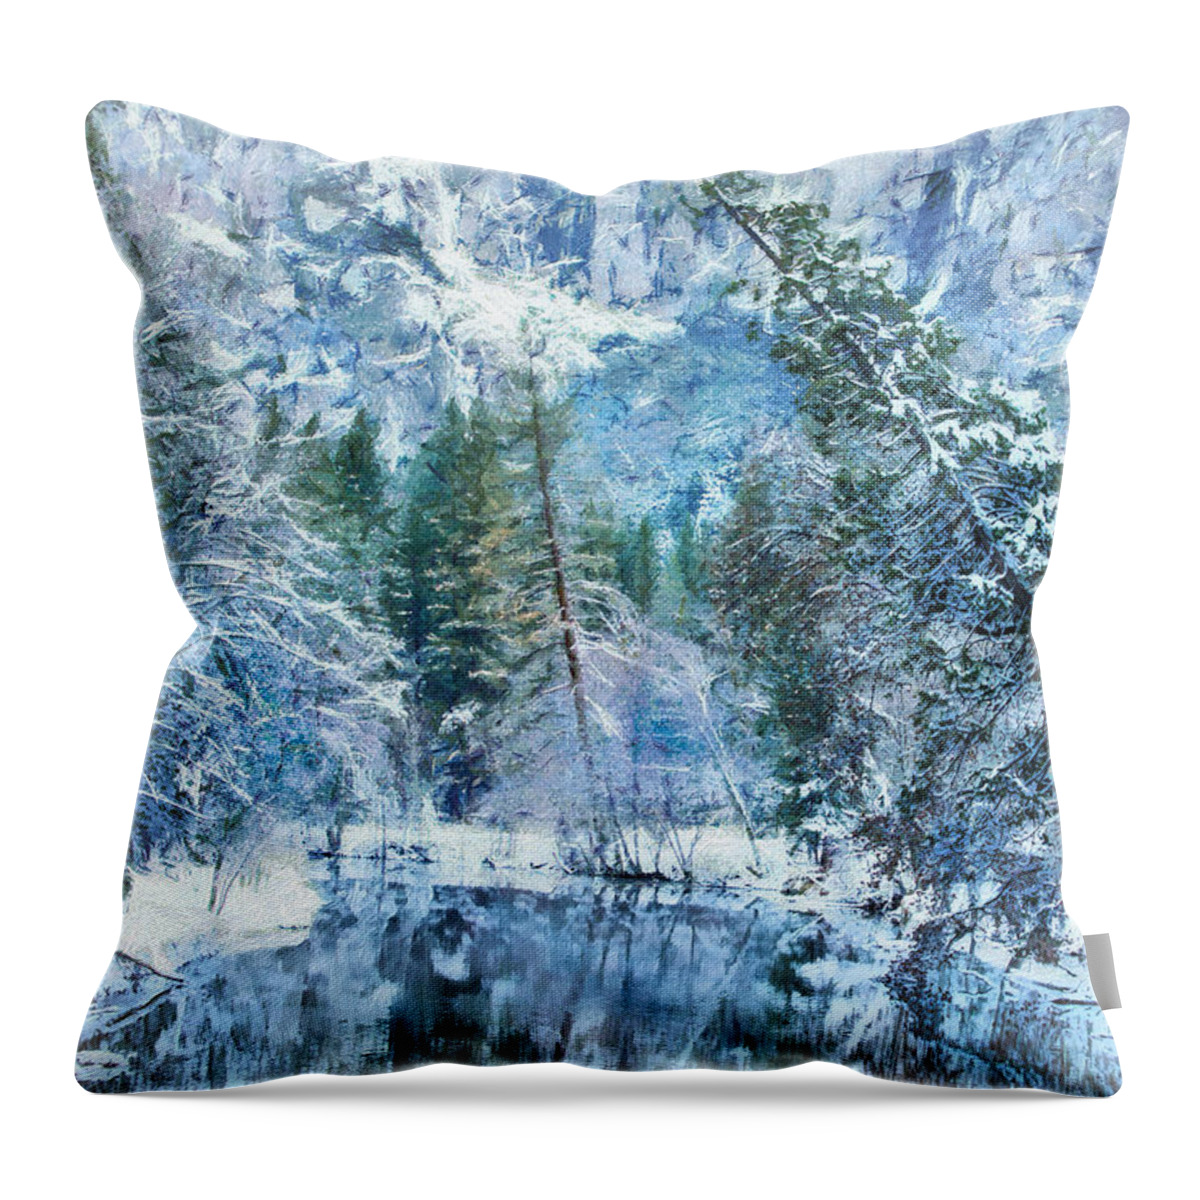 Landscape Throw Pillow featuring the photograph Frozen in Blue by Susan Eileen Evans